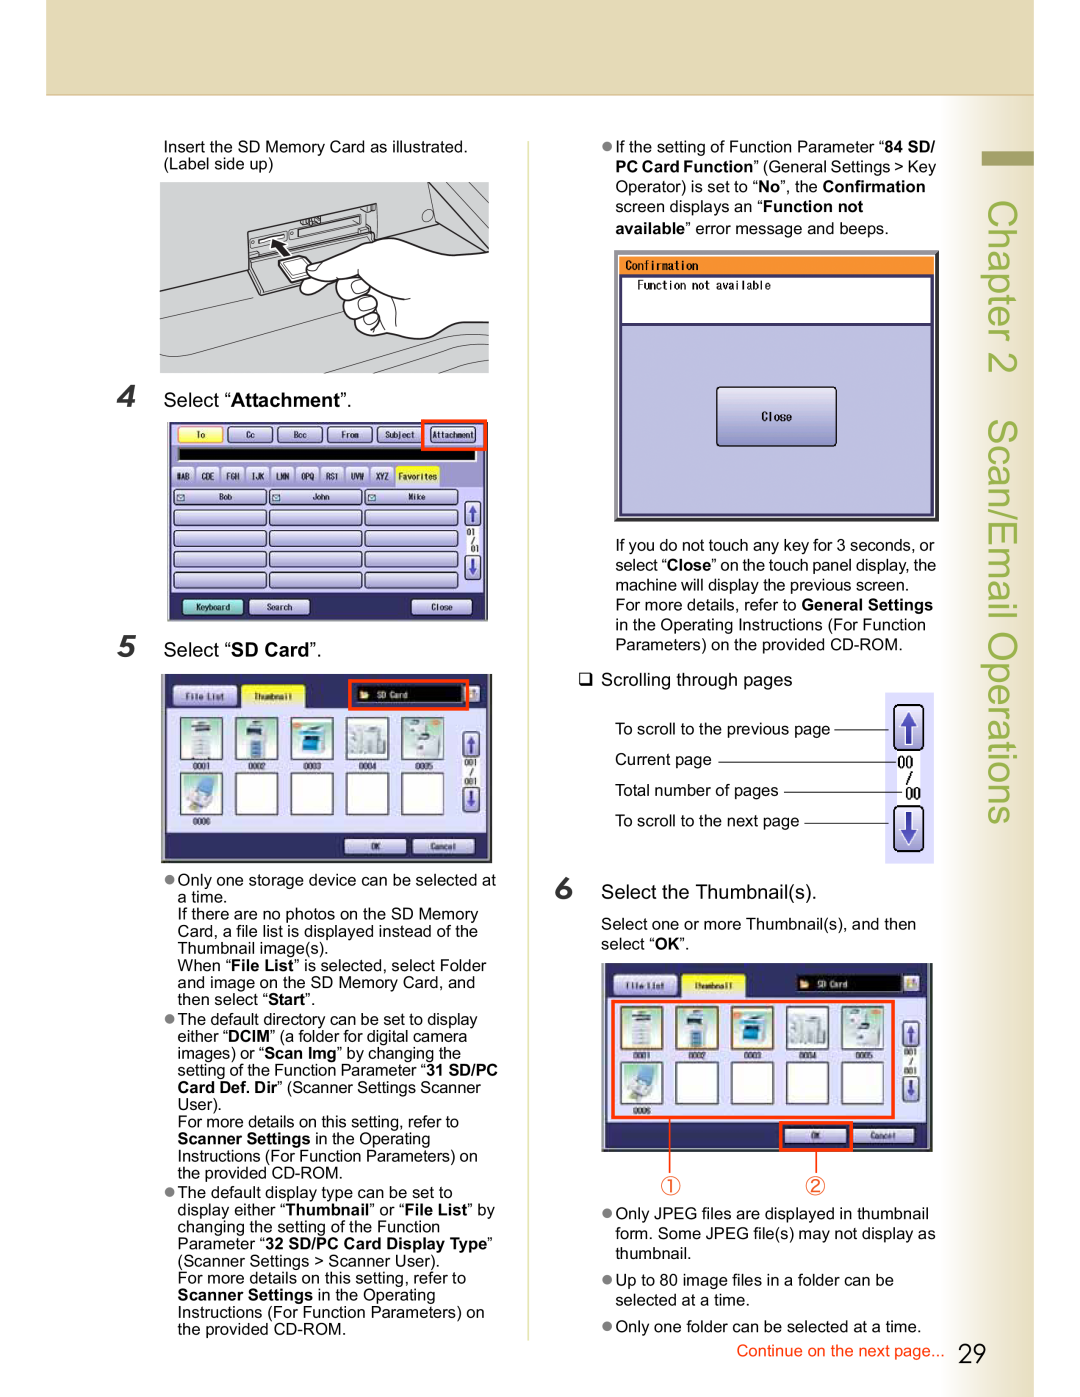 Panasonic DP-C213 manual Scan/Email, Select “Attachment” 5 Select “SD Card”, Select the Thumbnails, Scrolling through pages 